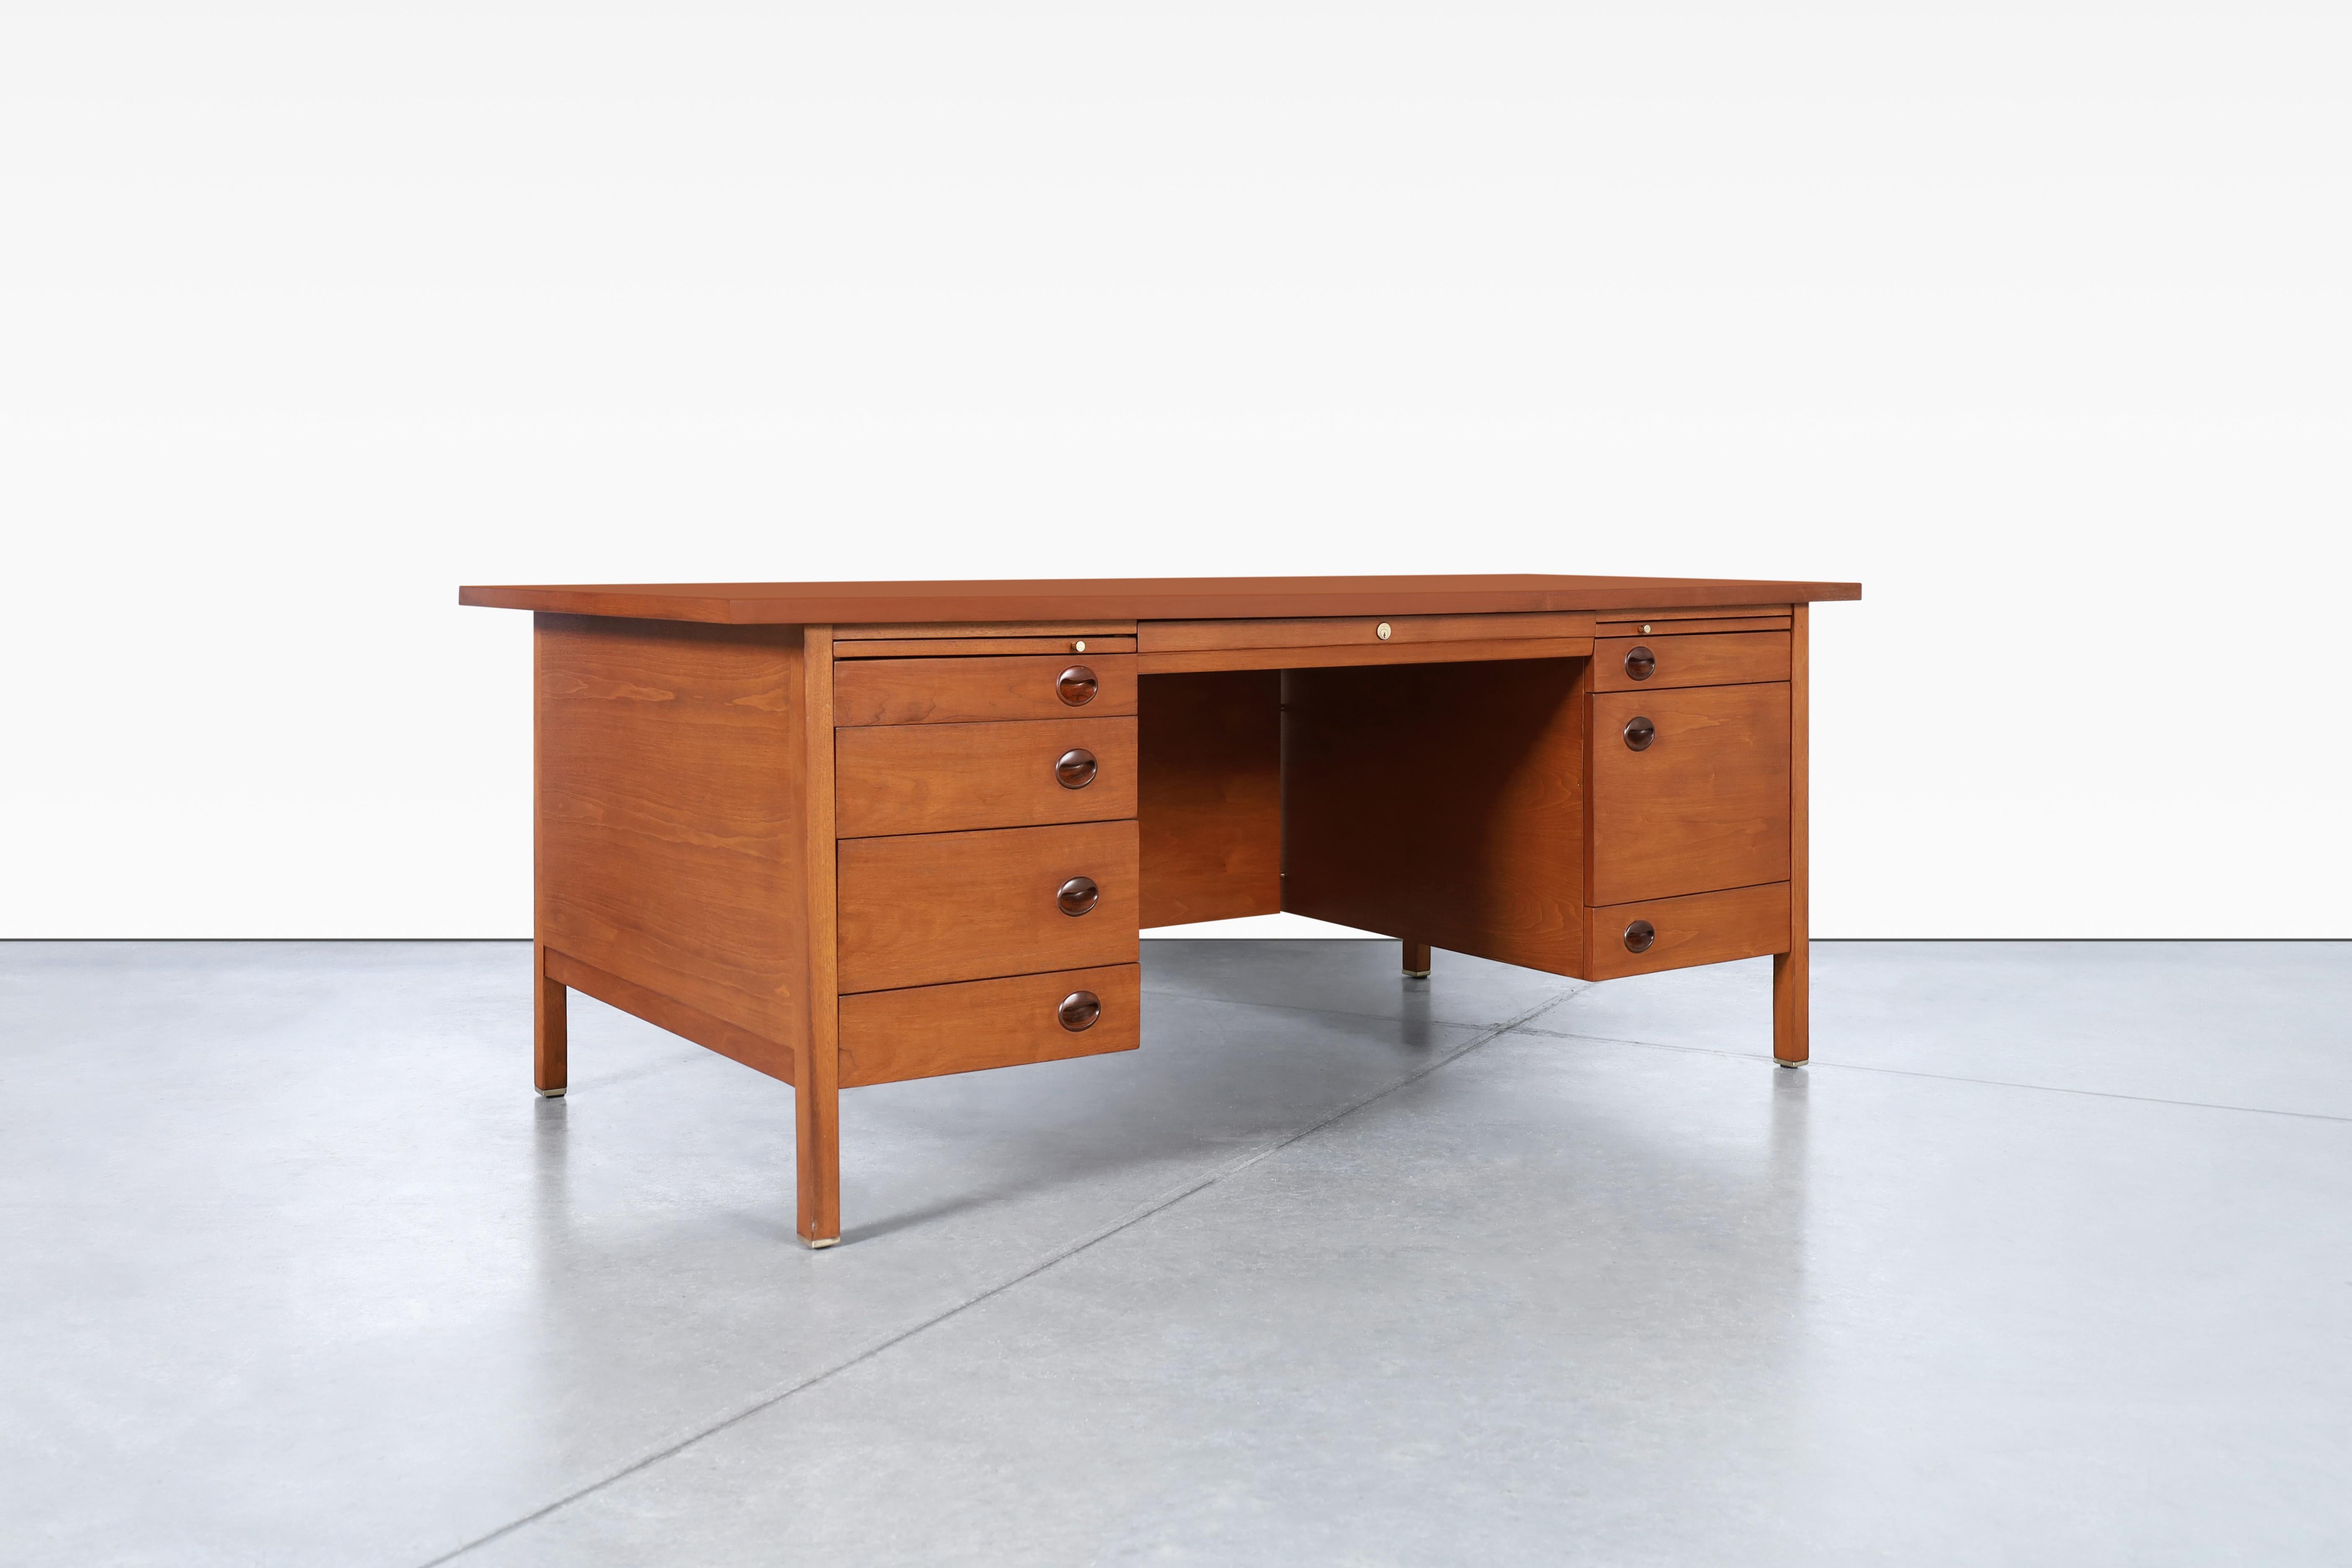 Wonderful mid-century executive walnut desk designed by Edward J. Wormley for Dunbar in the United States, circa 1950s. This desk is made with a timeless design that has been professionally refinished, restoring it to its original glory. Crafted